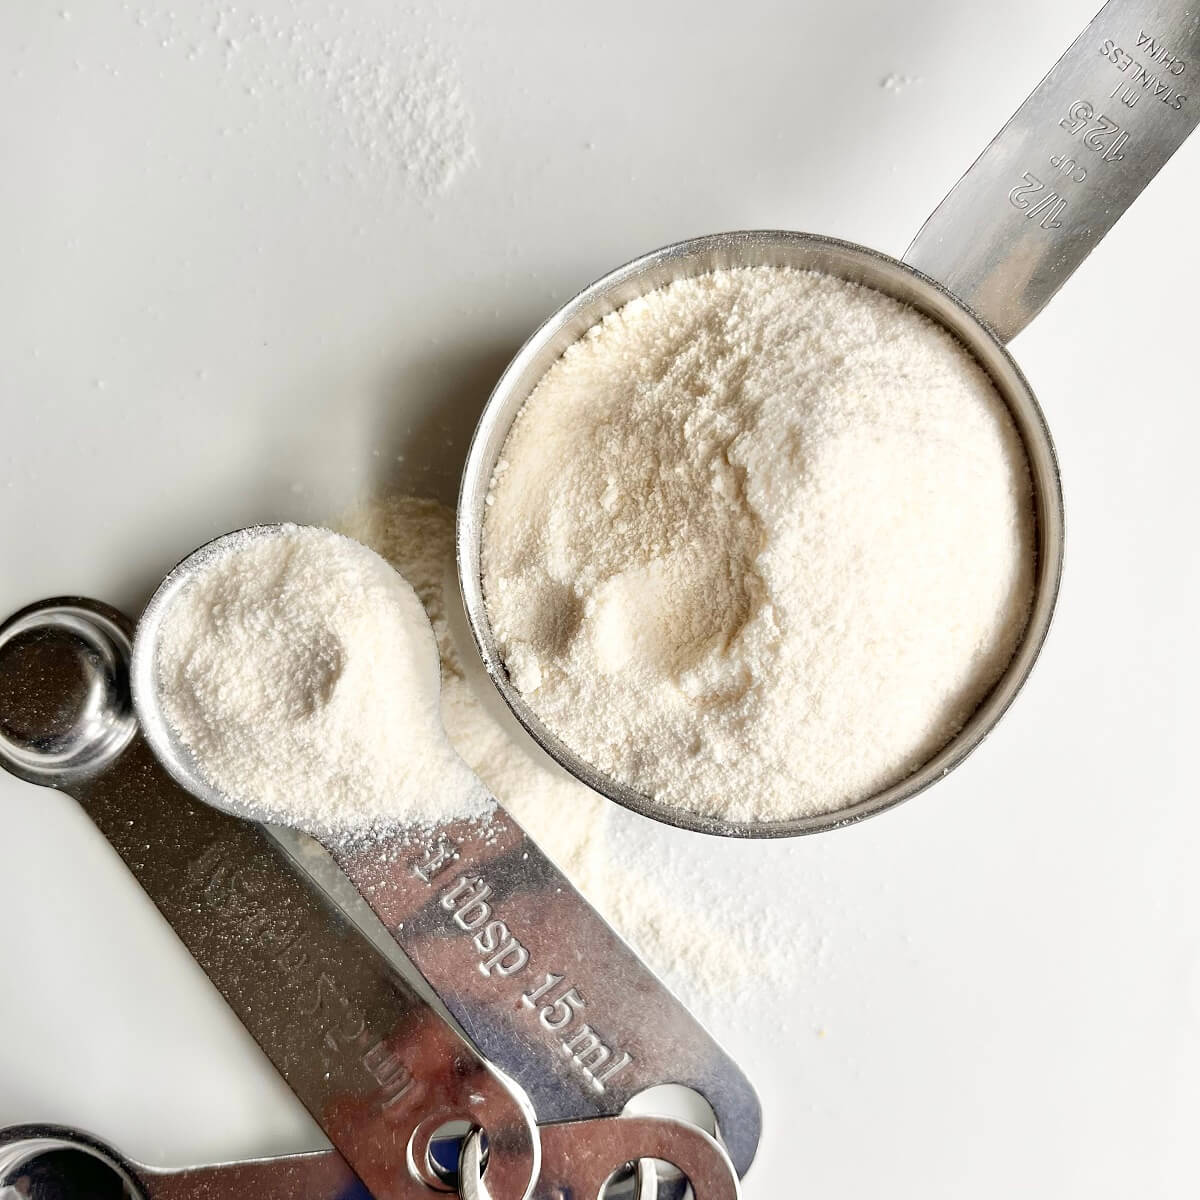 Coconut flour in a metal measuring cup next to measuring spoons.